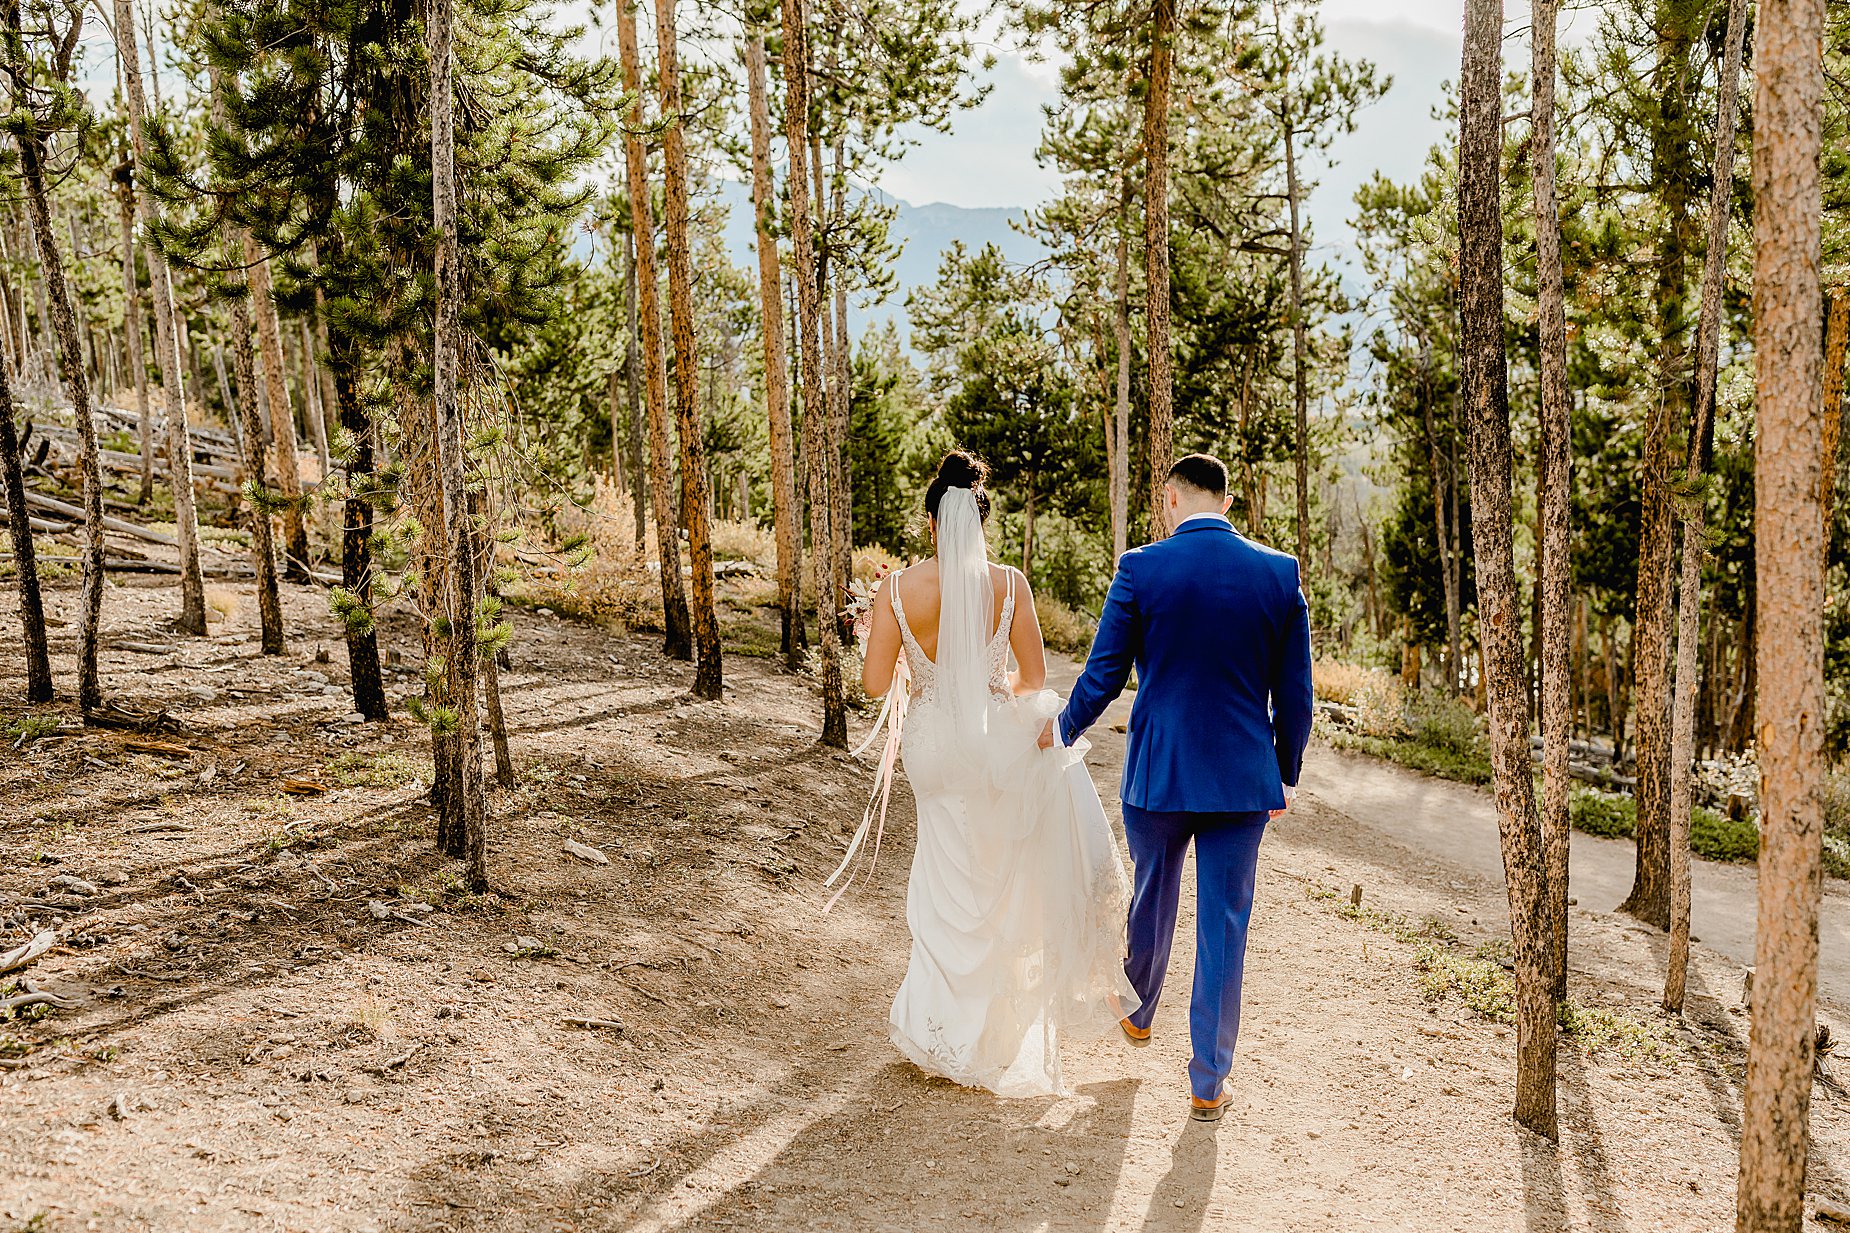 Couple hikes through forest in breckenridge colorado for their elopement